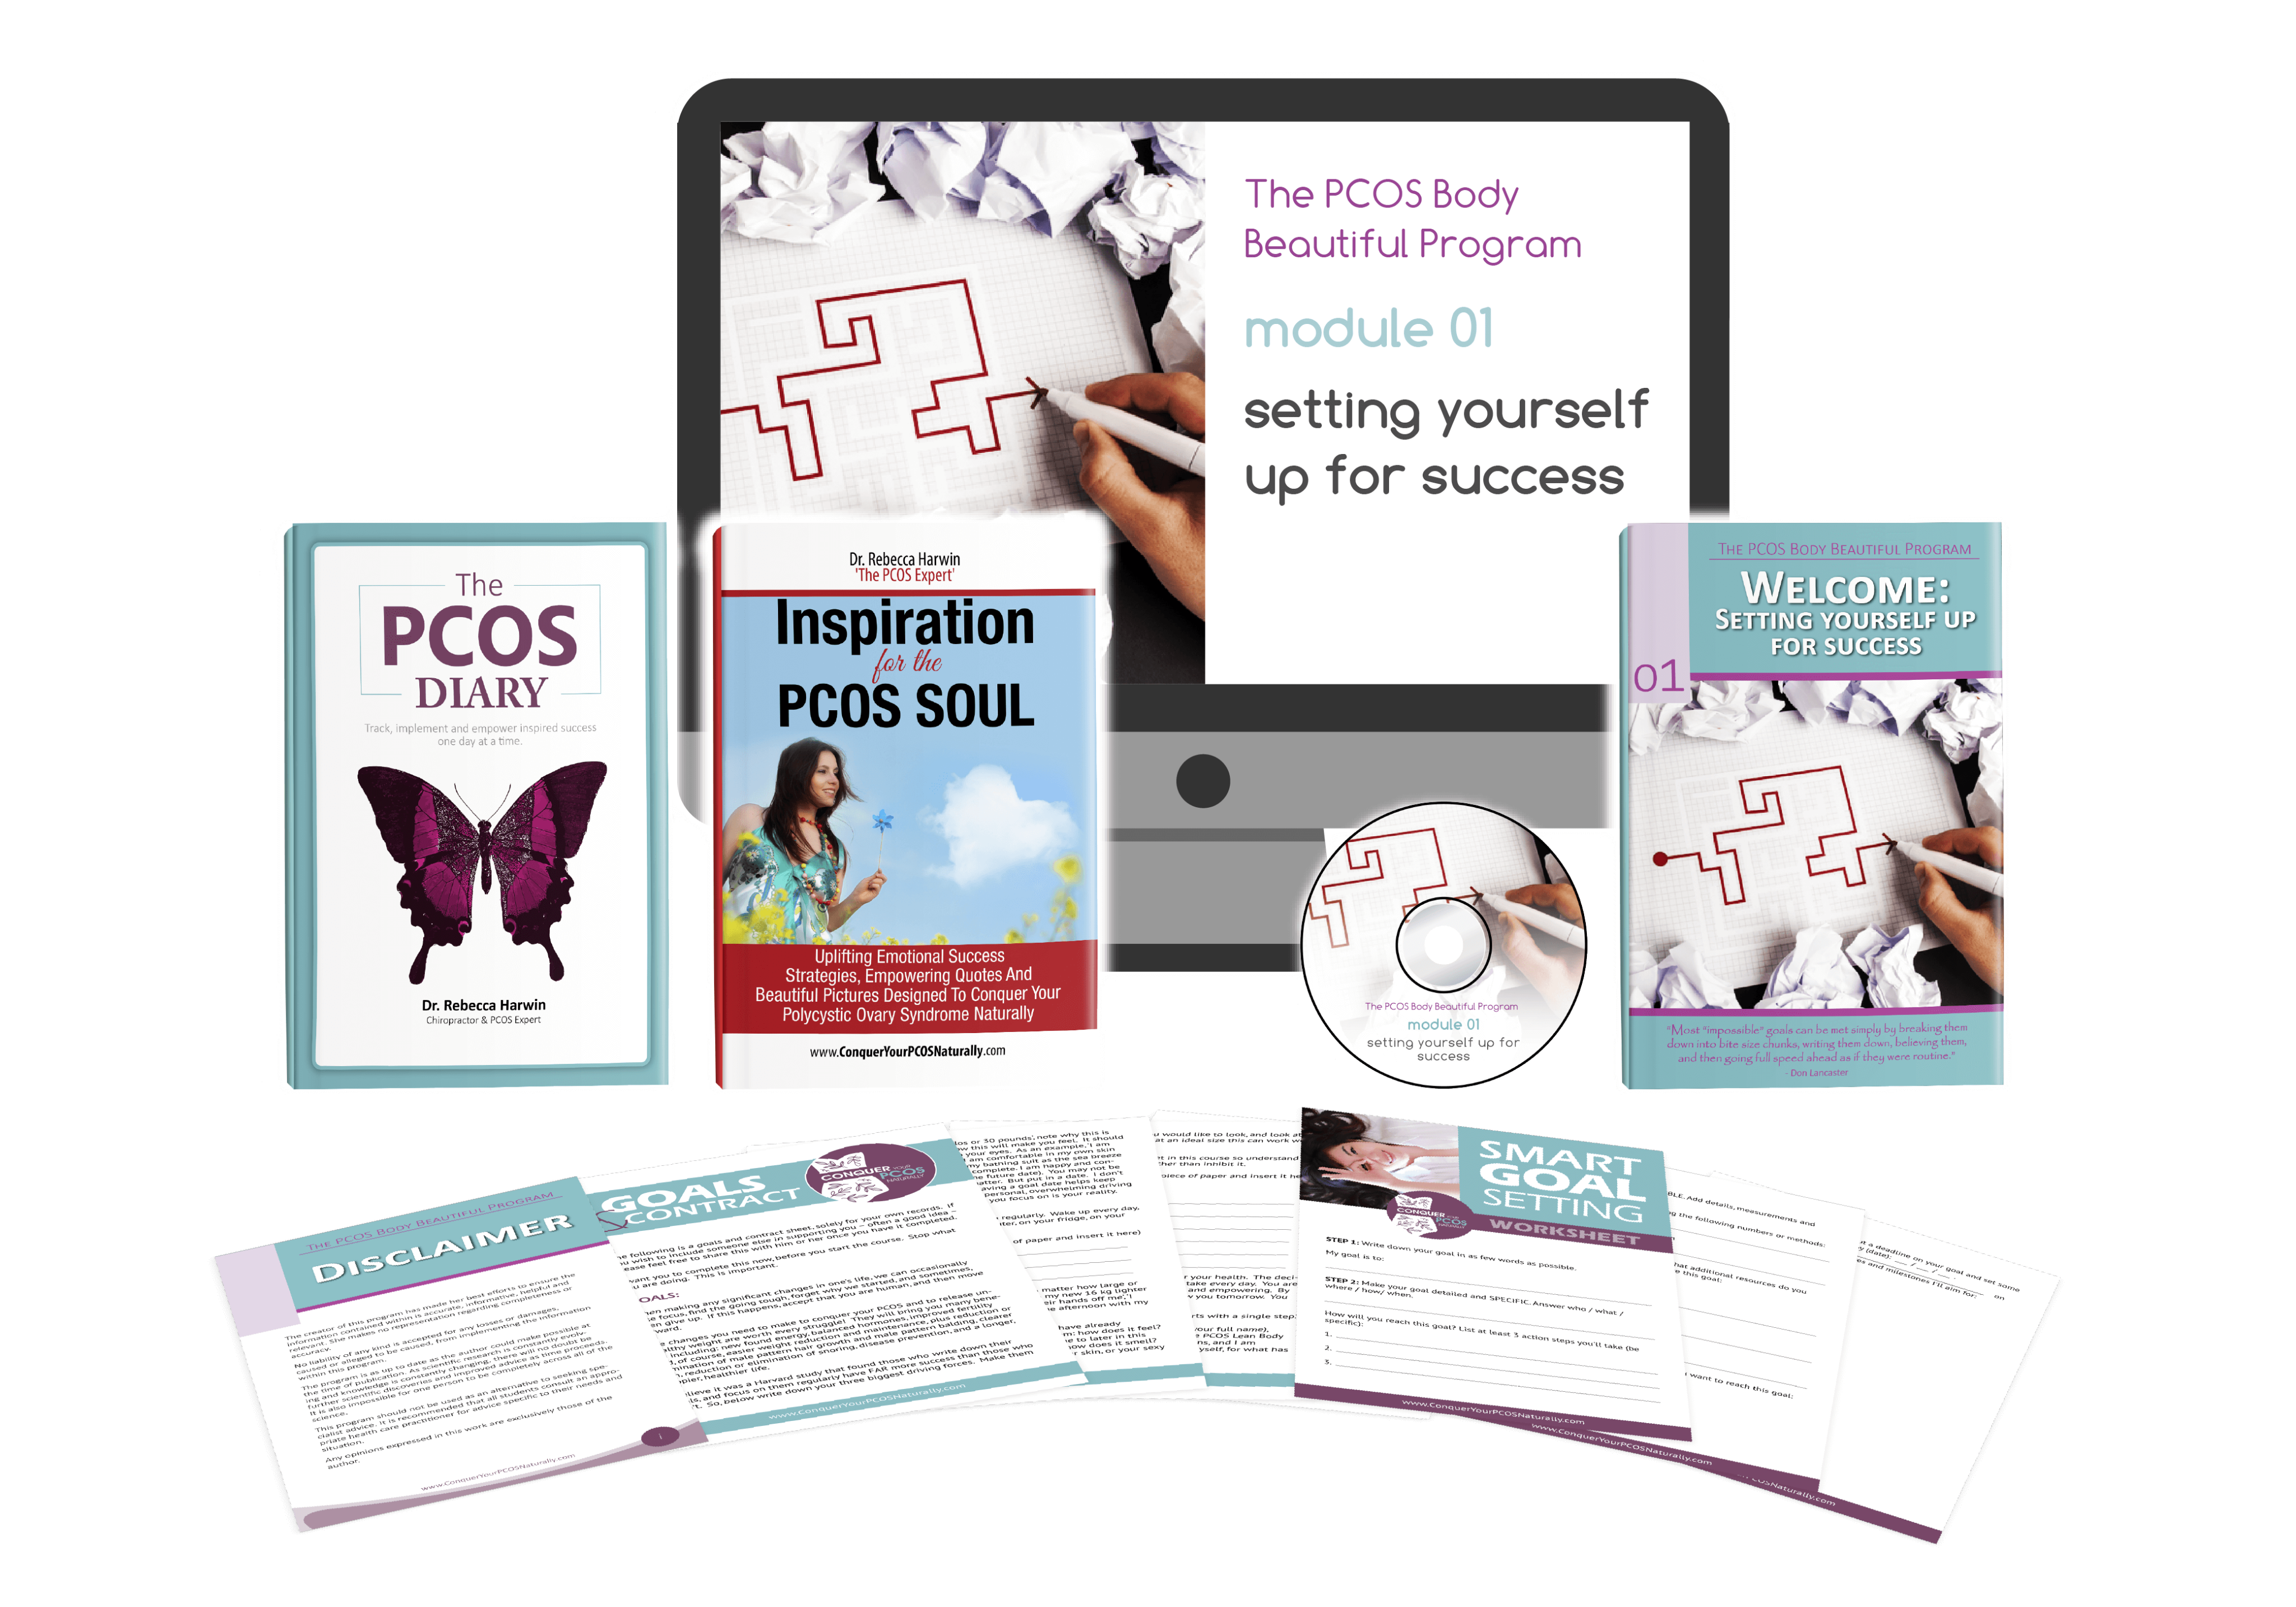 Set yourself up for success - PCOD Body Beautiful Program - module 1 graphic